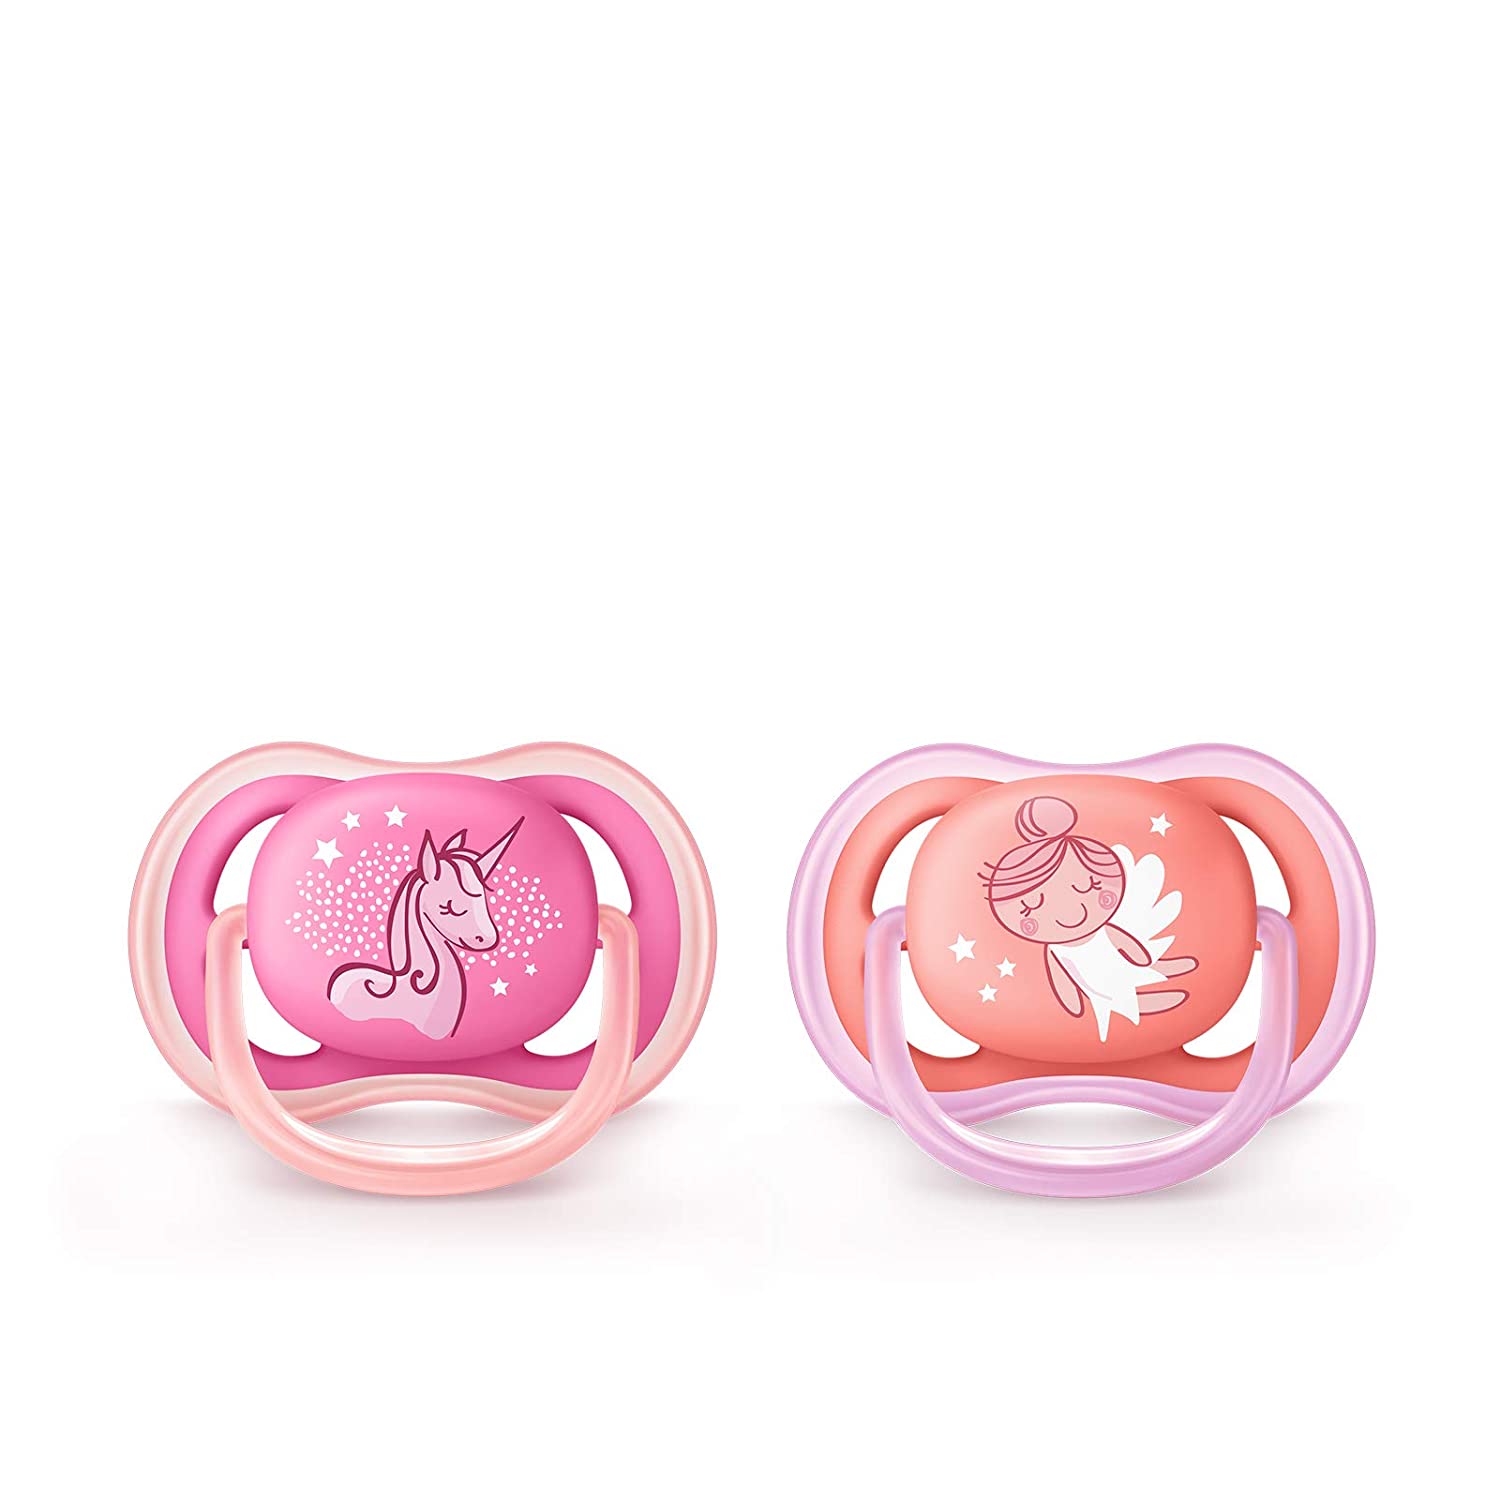 Philips Avent Ultra Air Soothers for Infants between 6-18 Months - Maximum Air Circulation - Twin Pack with Motif Girls